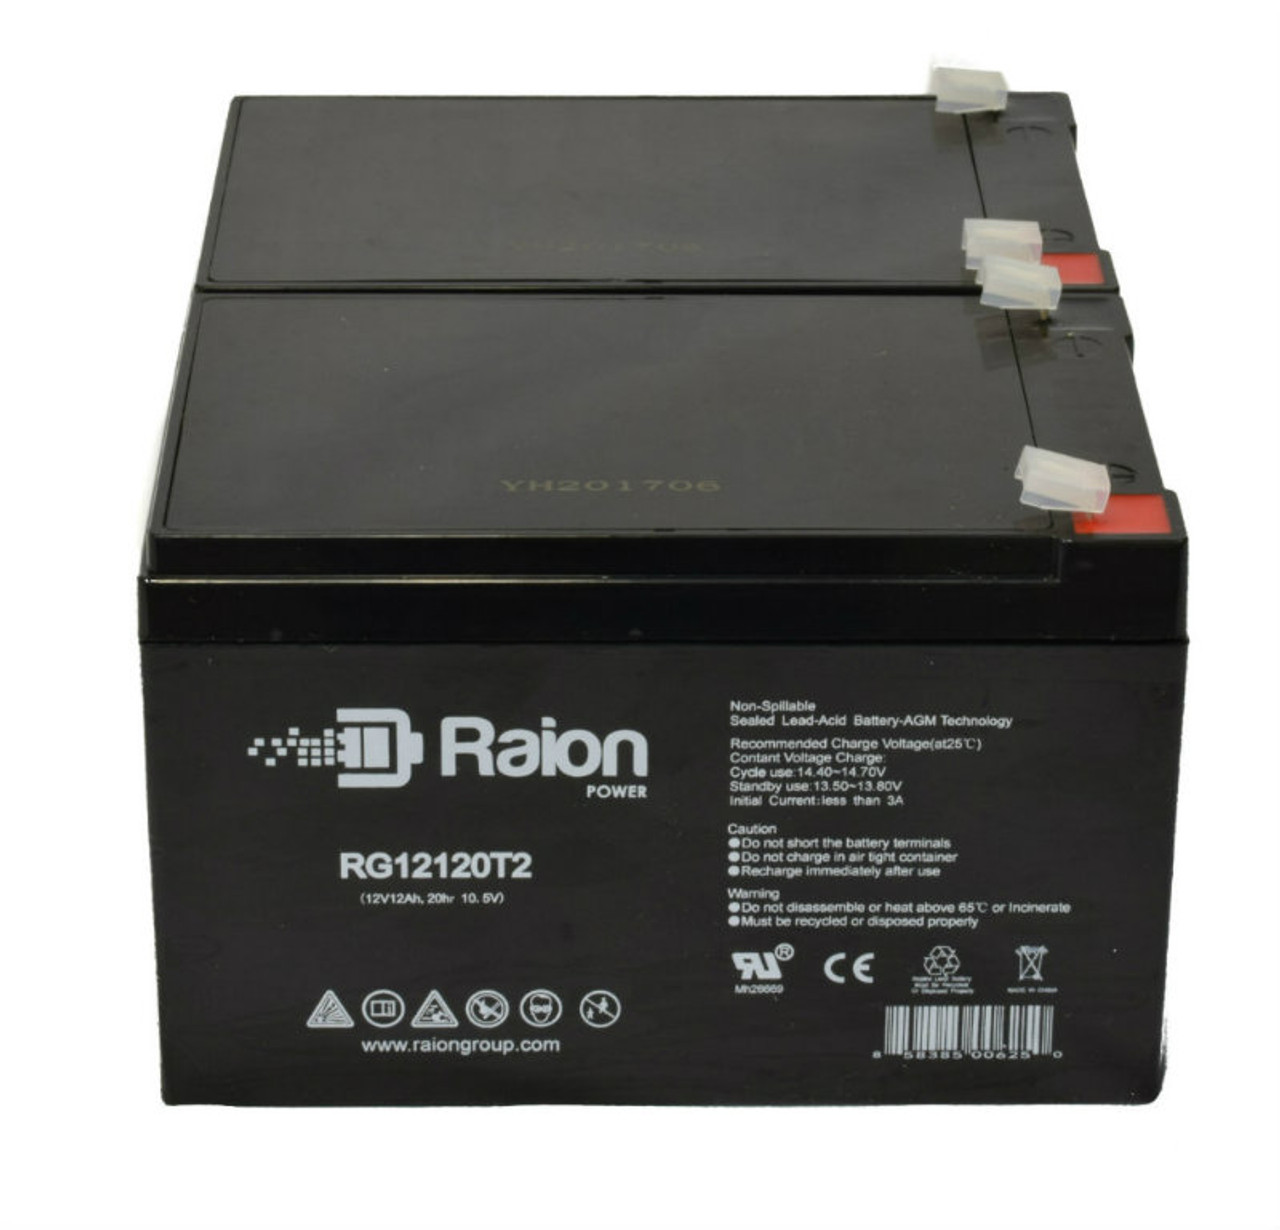 Raion Power RG12120T2 Replacement Fire Alarm Control Panel Battery for Altronix SMP10PM24P16 - 2 Pack